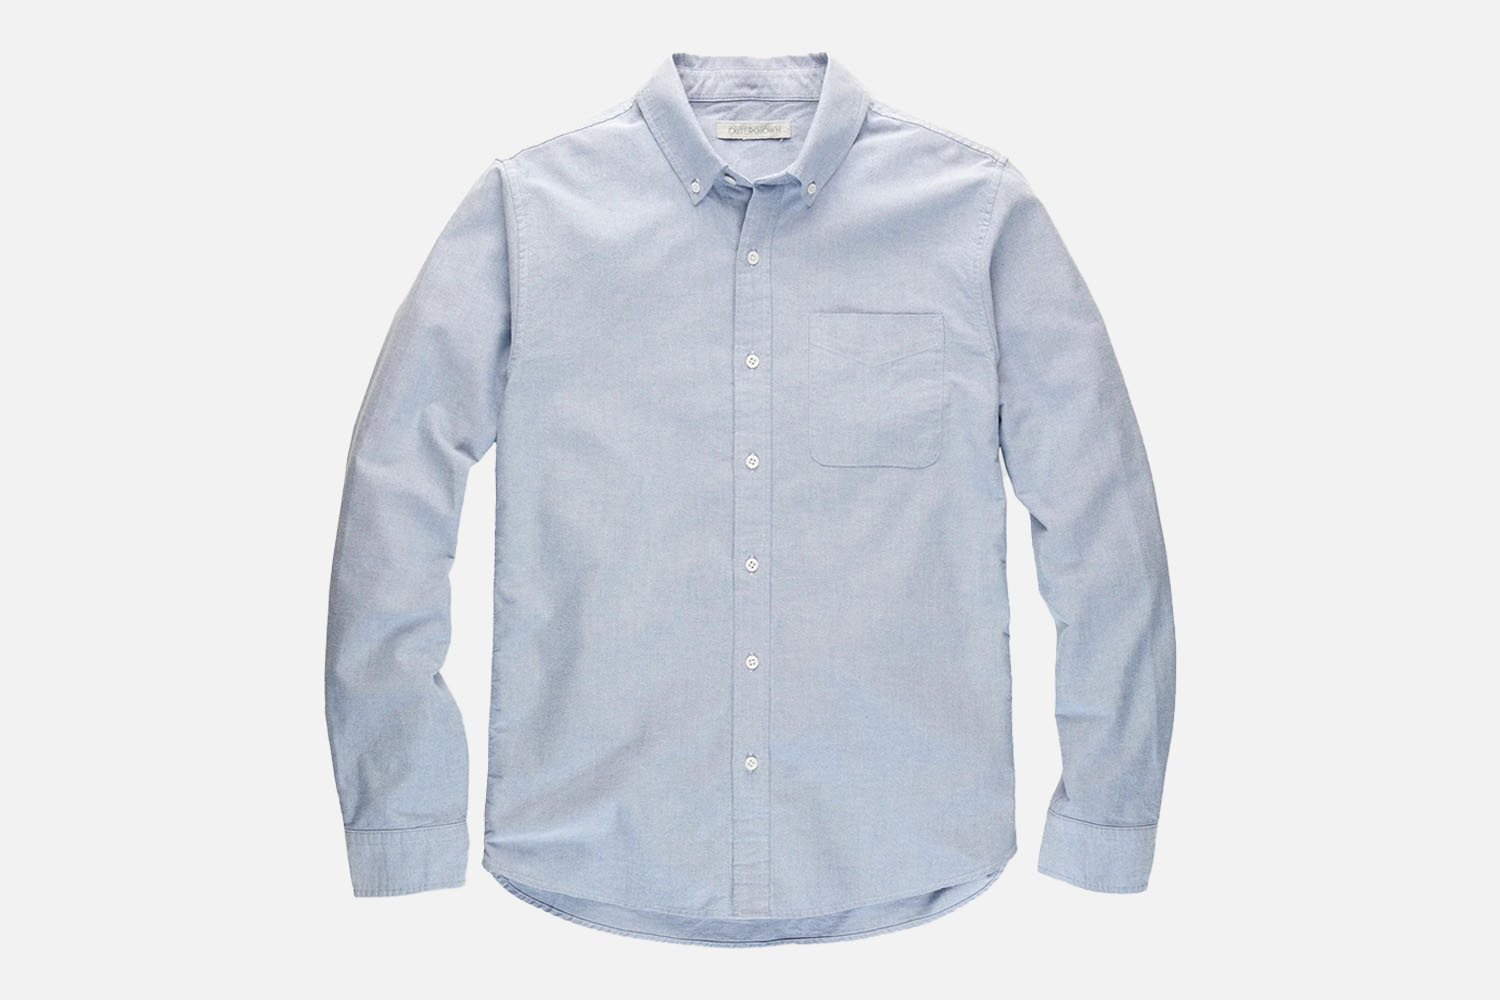 Outerknown Atlantic Oxford Shirt